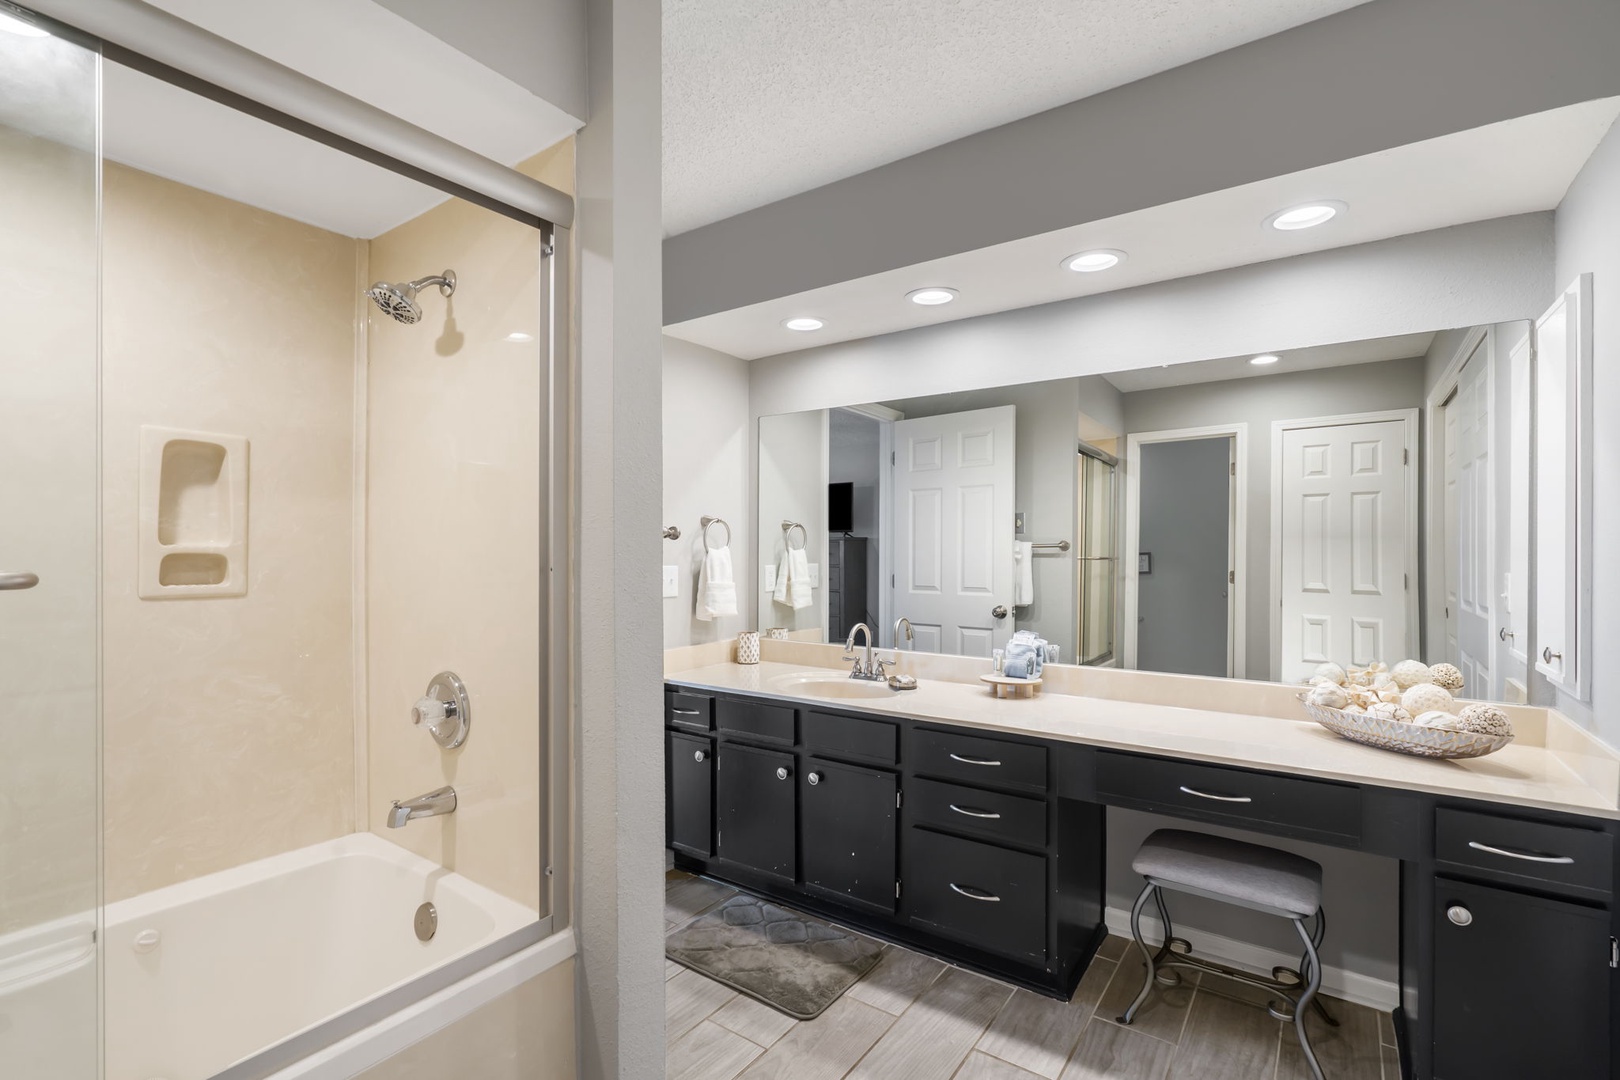 Unit 19: The primary ensuite offers a large vanity & shower/tub combo